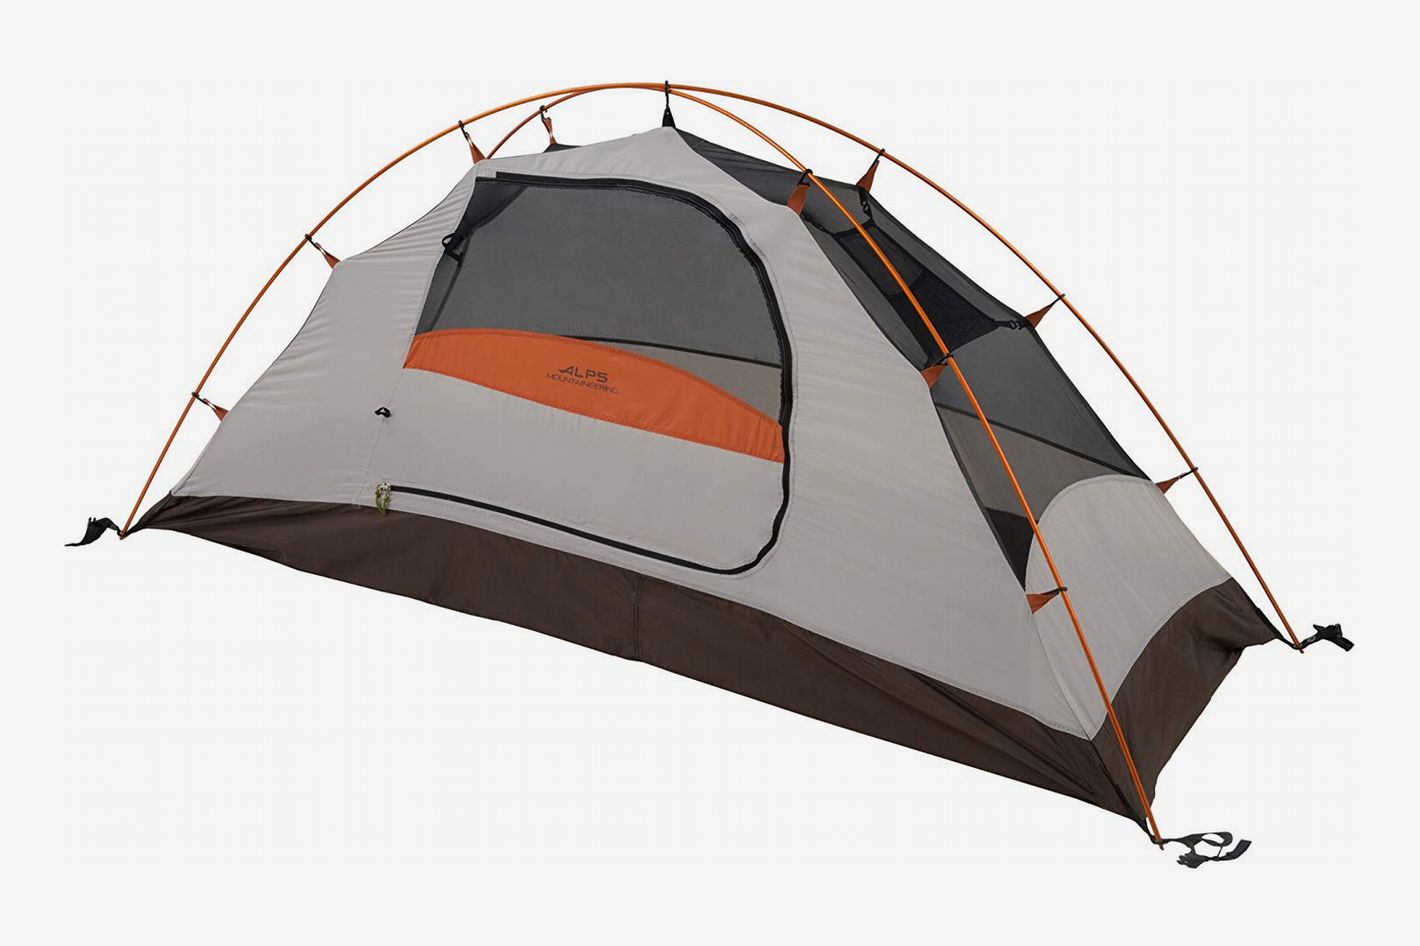 Tegen de wil abces Groene achtergrond 11 Best Outdoor Tents for Camping and Backpacking 2022 | The Strategist